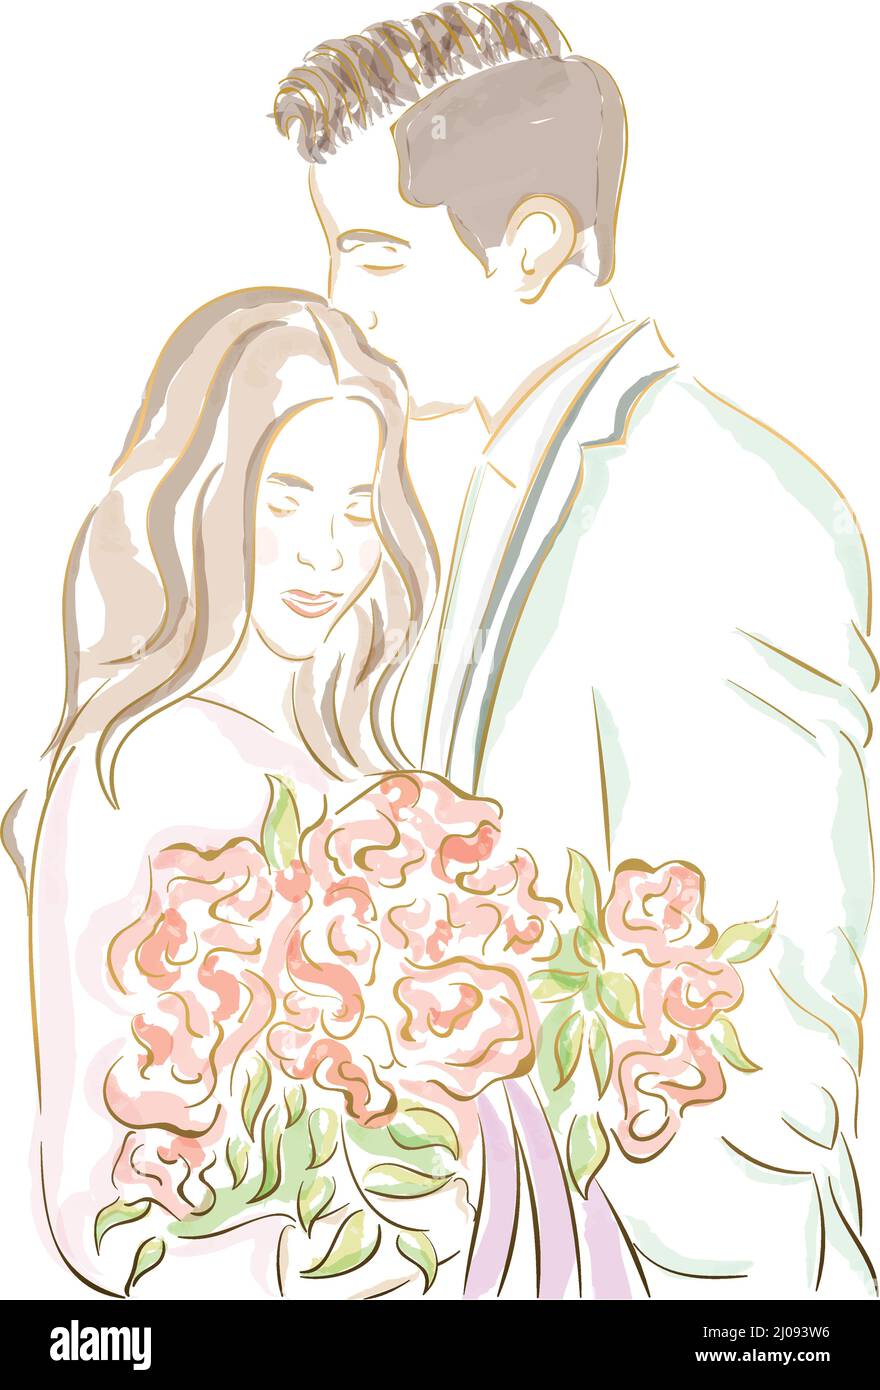 Happy Married Couple Sketch Stock Vector (Royalty Free) 136855532 |  Shutterstock